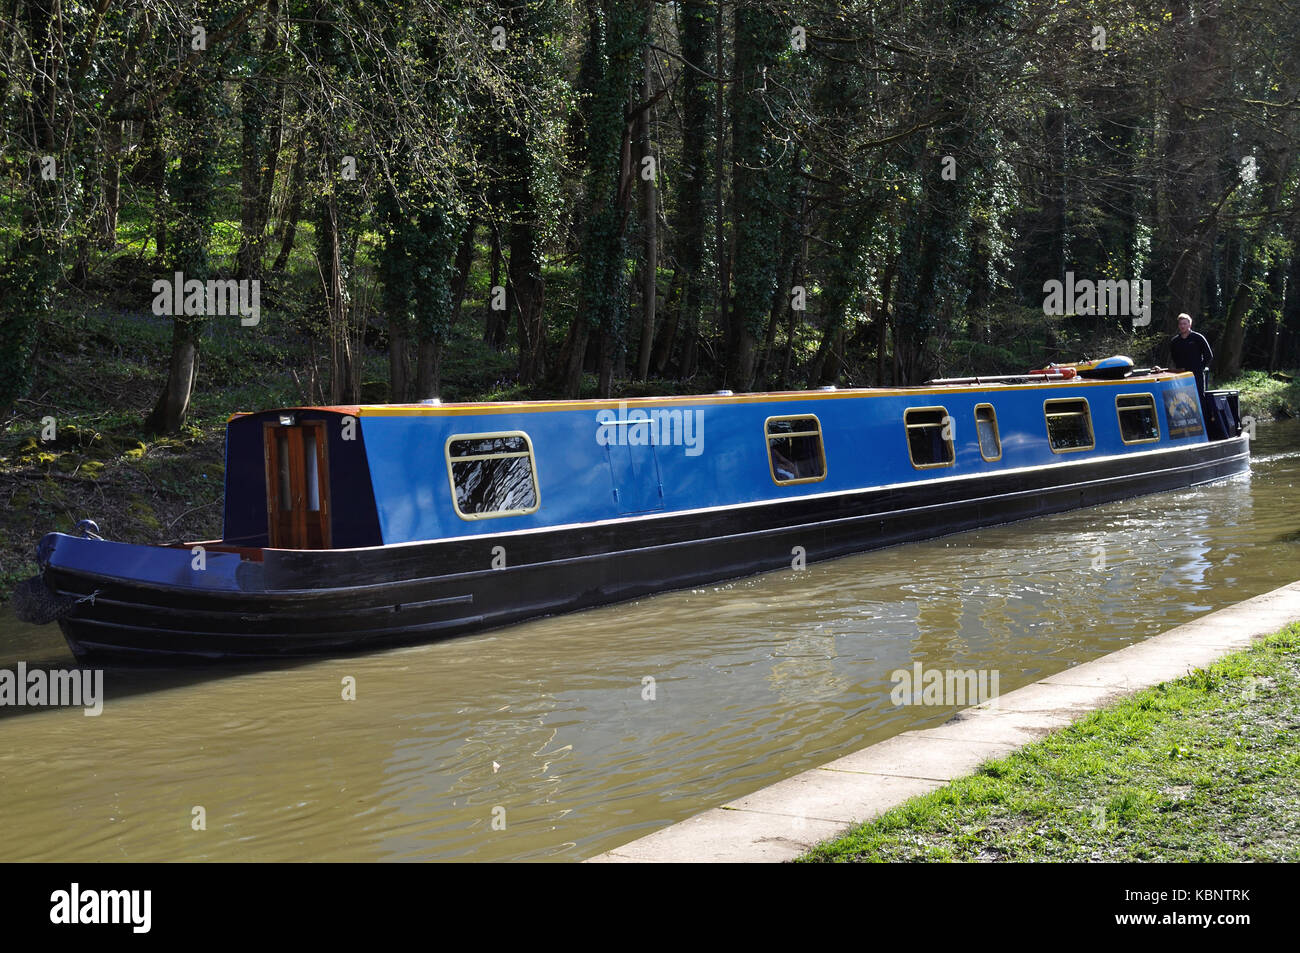 Narrowboat on the Kennet and Avon Canal. Stock Photo